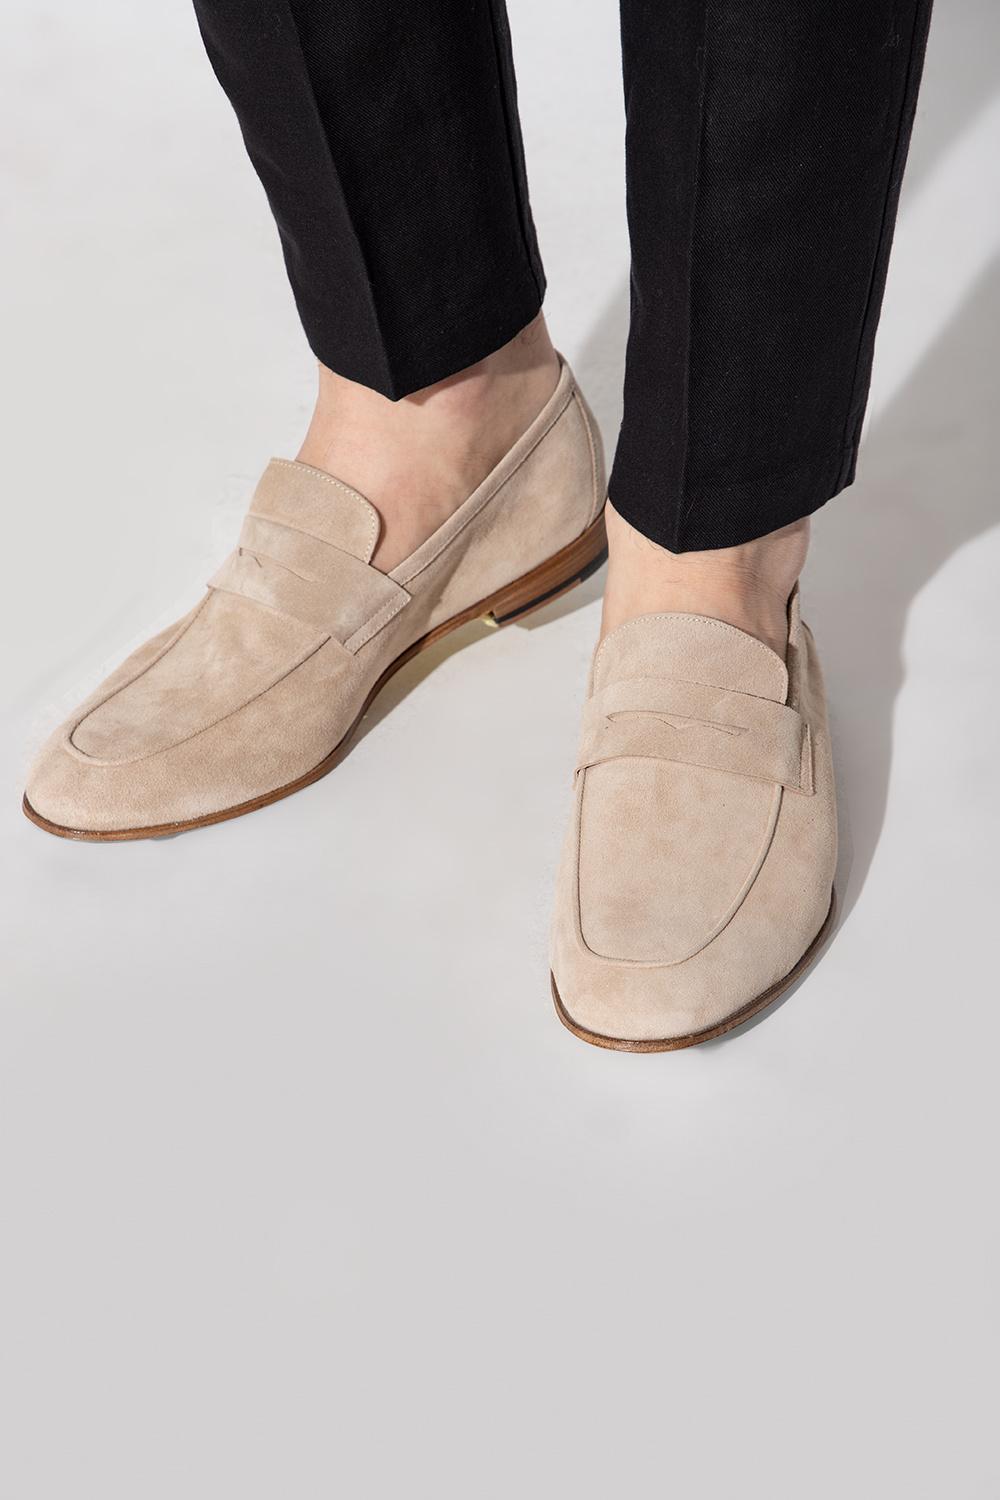 Paul Smith 'livino' Loafers in Natural for Men | Lyst